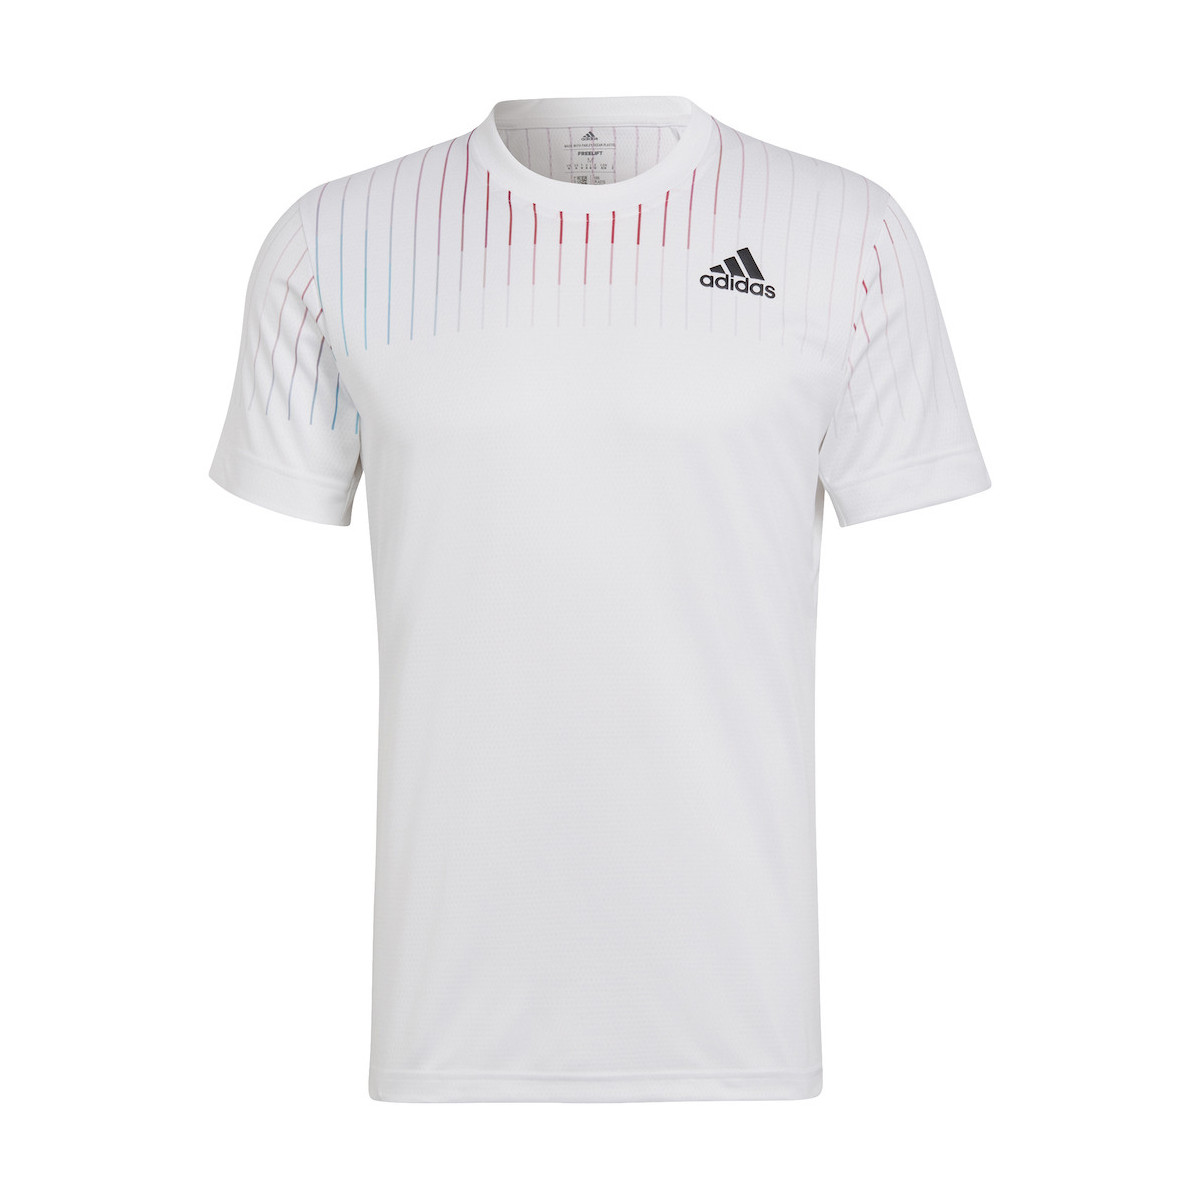 Adidas Melbourne Printed T-shirt Homme PE22 - 